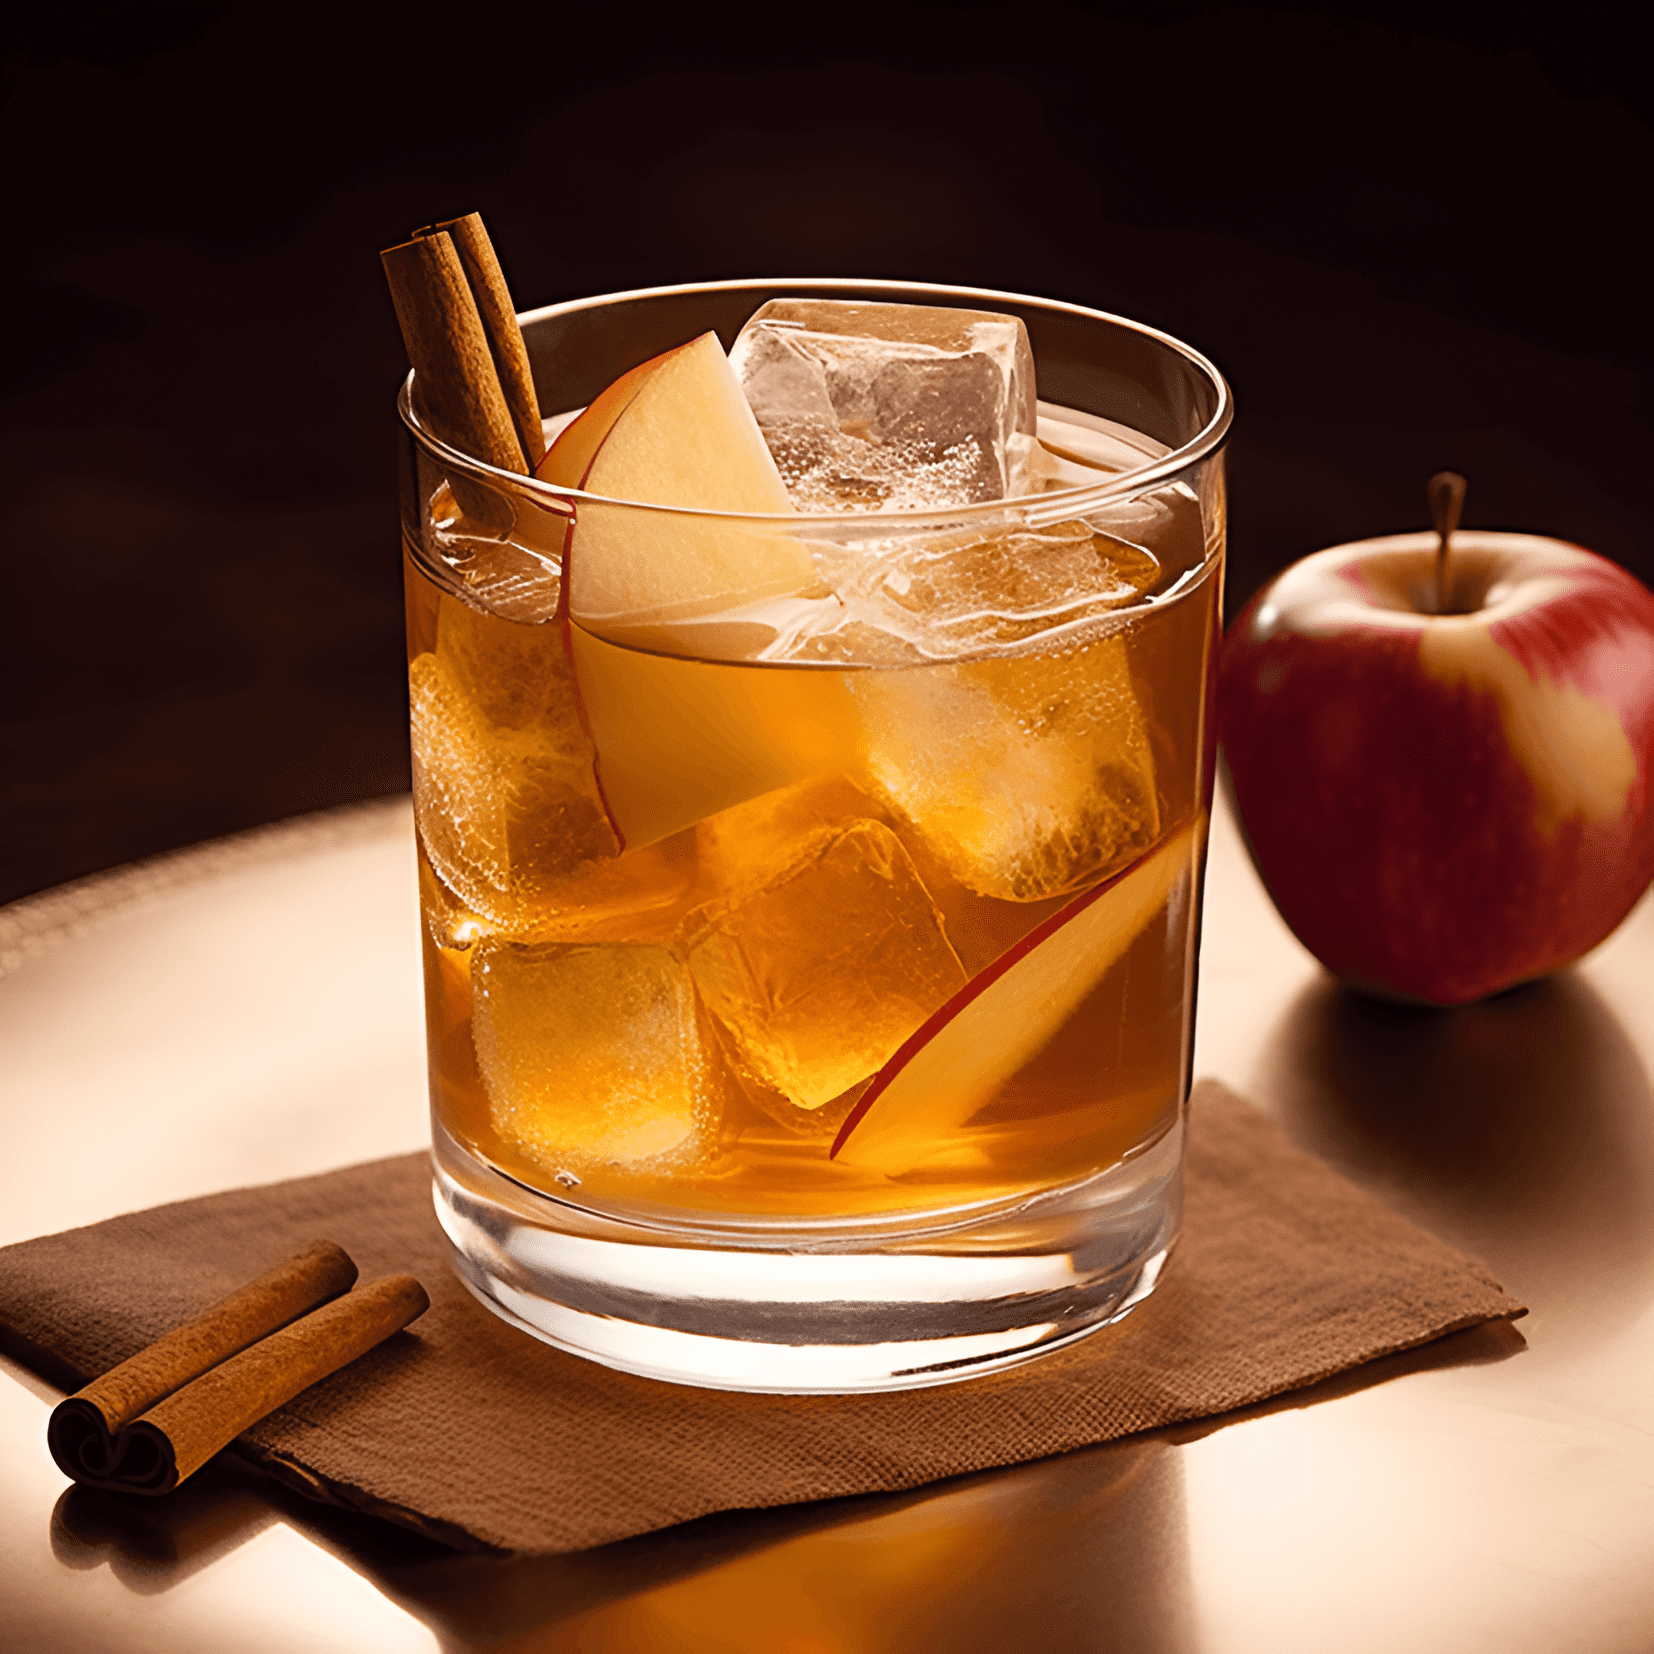 Quebec Cocktail Recipe - The Quebec cocktail has a rich, sweet, and slightly tart taste. The combination of whiskey, maple syrup, and apple cider creates a harmonious blend of flavors that is both warming and refreshing. The cocktail has a smooth, velvety texture and a lingering finish that leaves you wanting more.